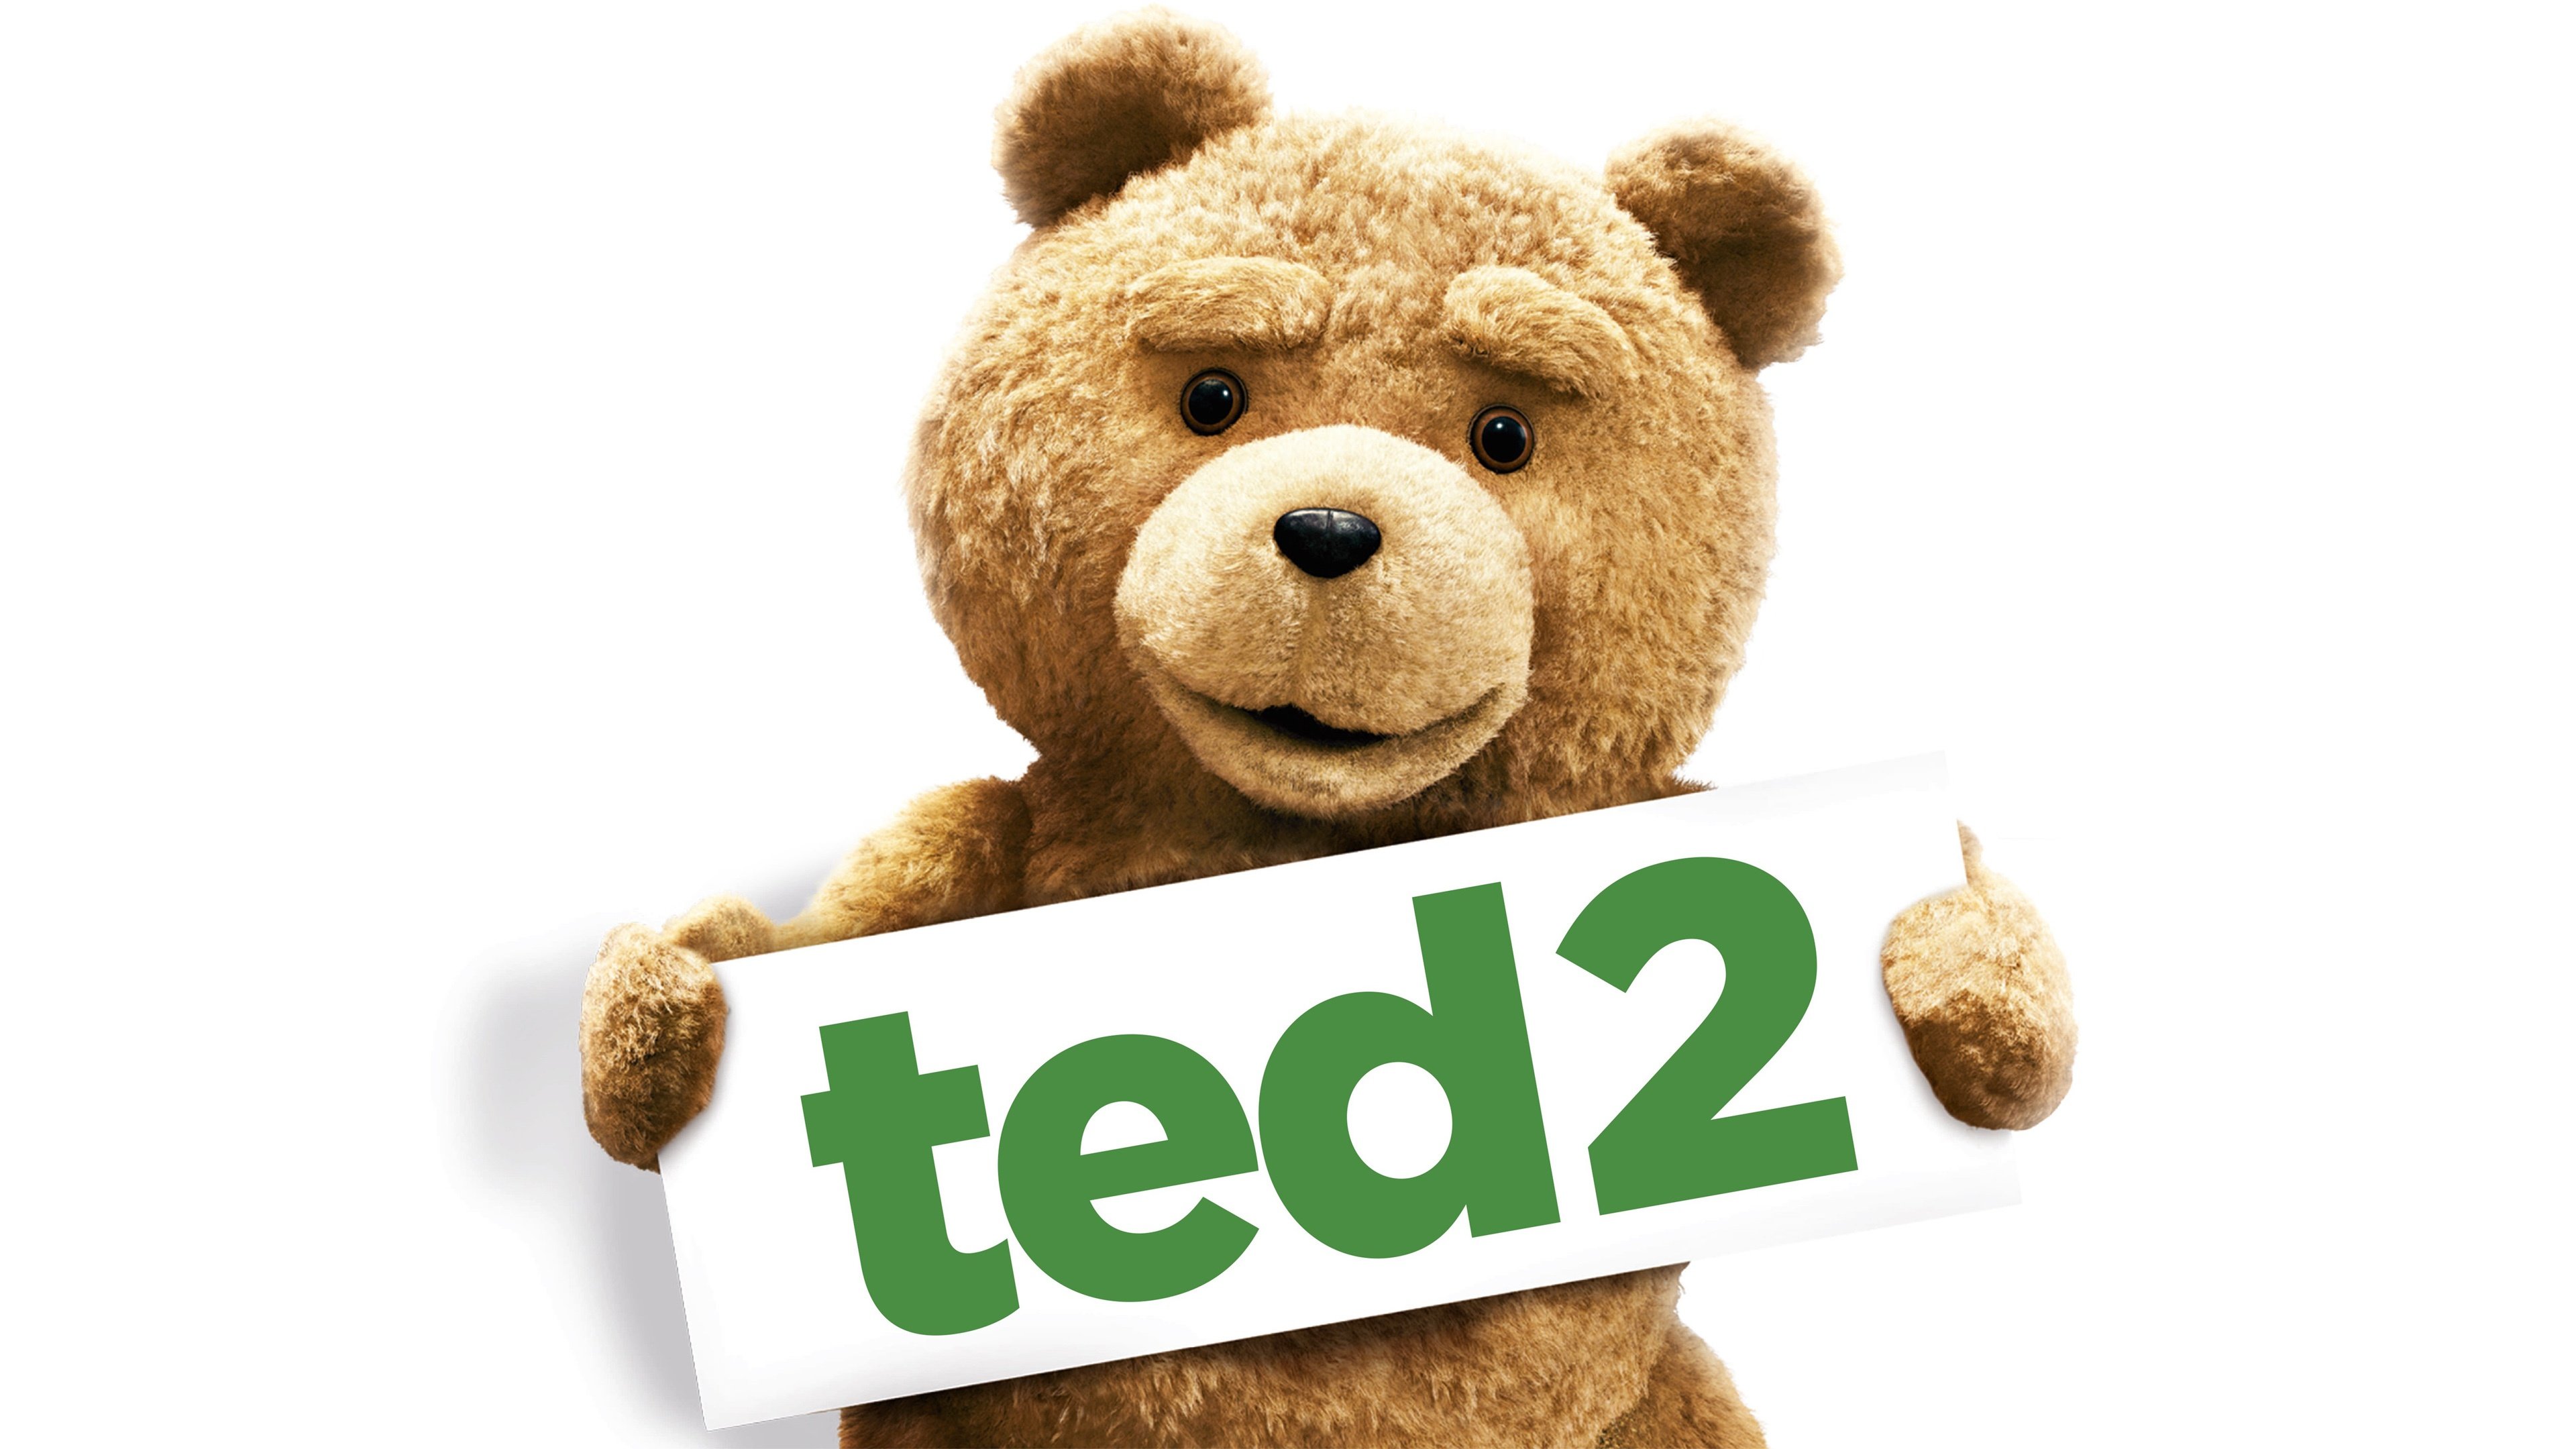 2015 ted 2 movie